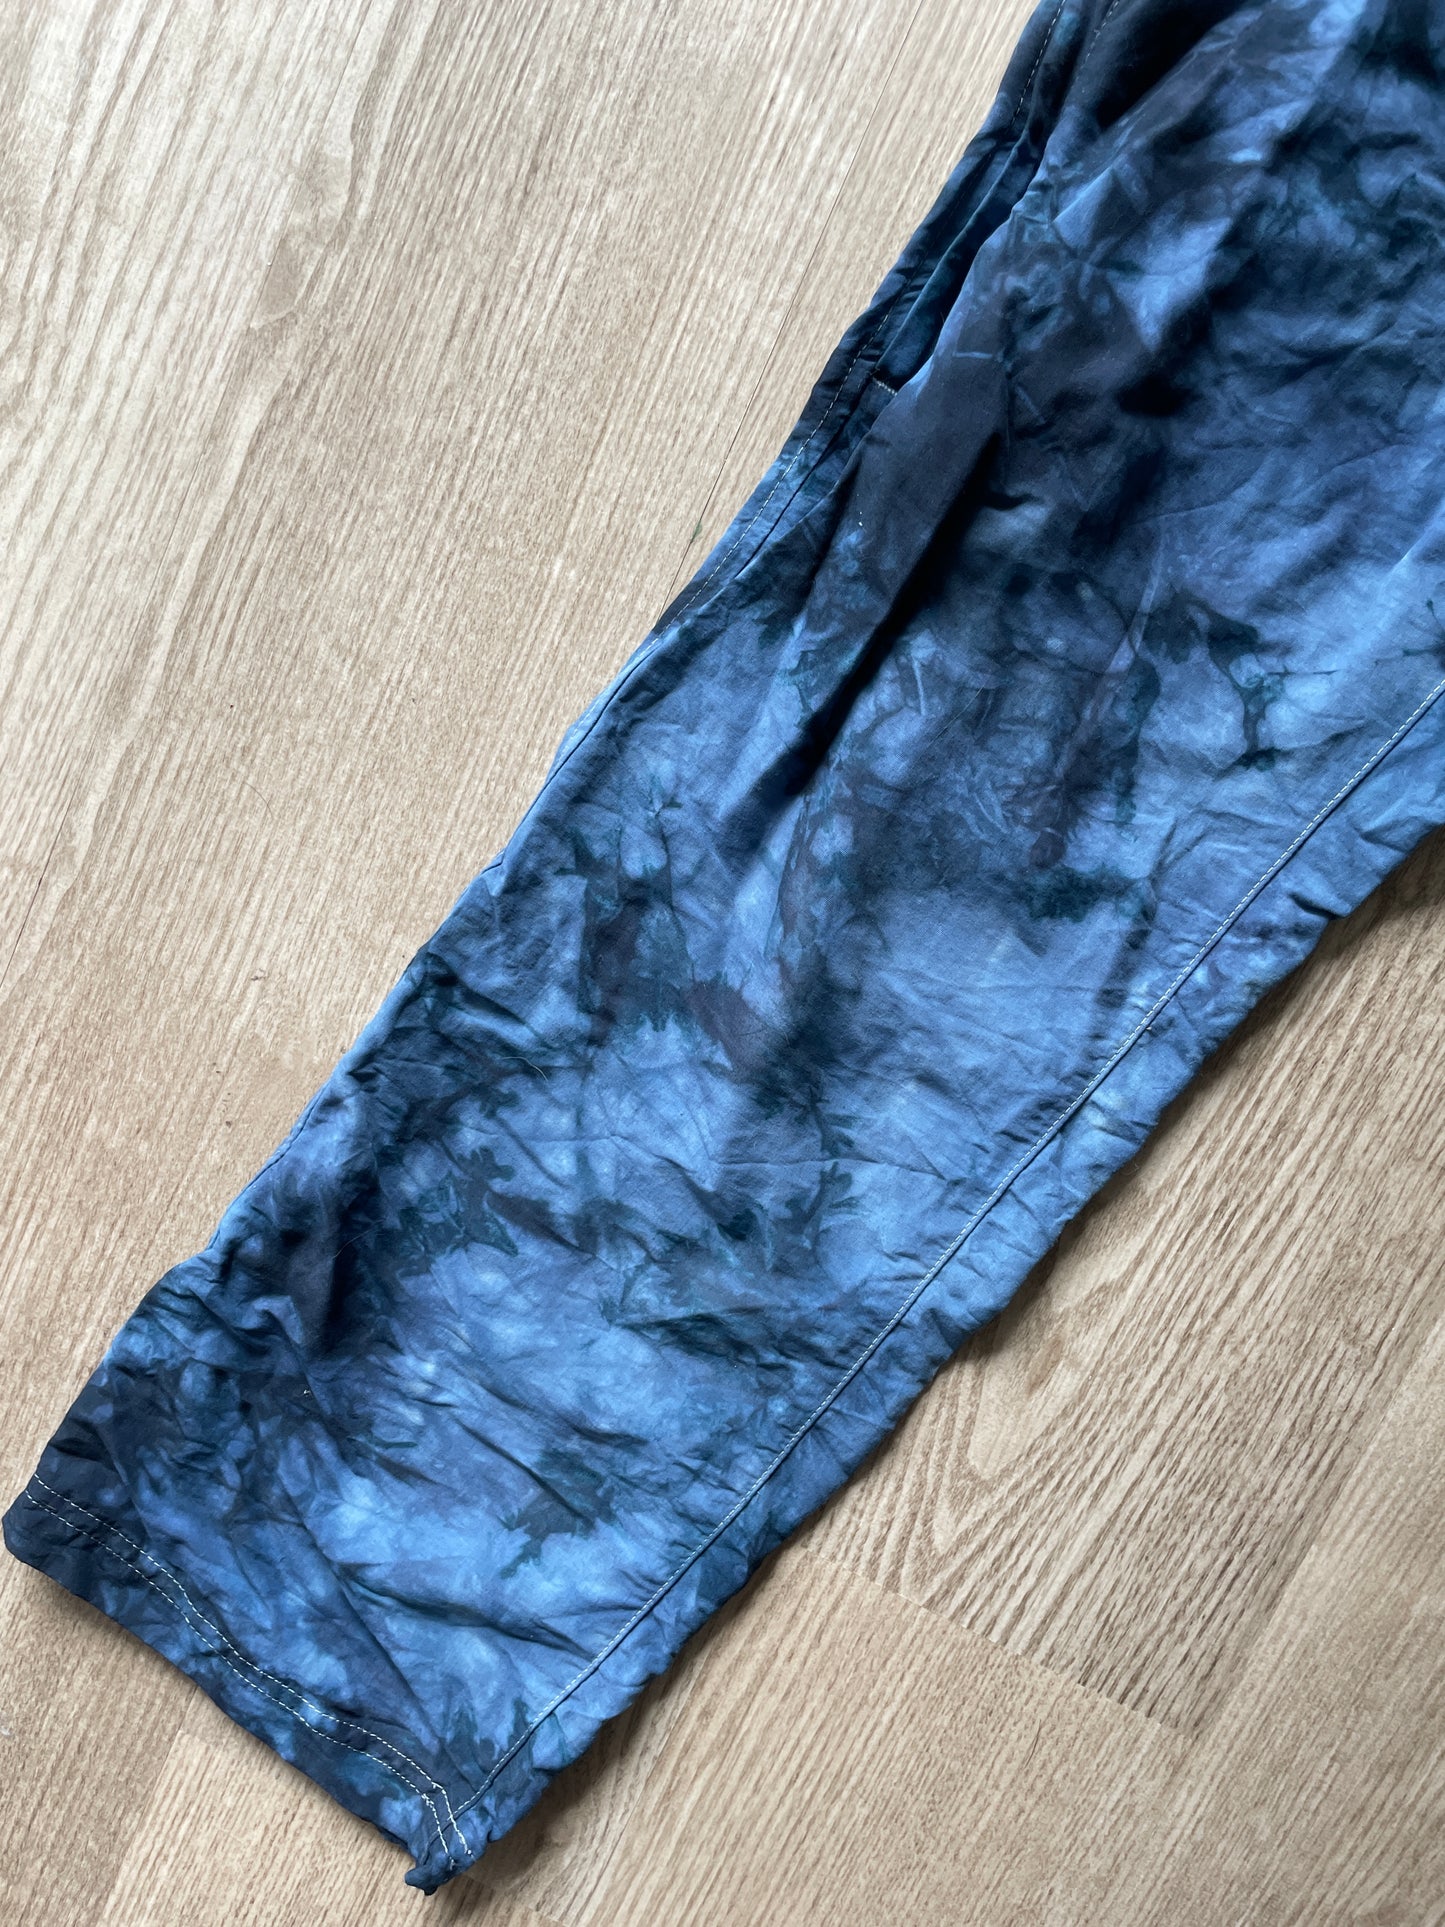 Unisex Tie Dye REI Climbing Pants | One-Of-a-Kind Upcycled Black and Gray Crumpled Pants